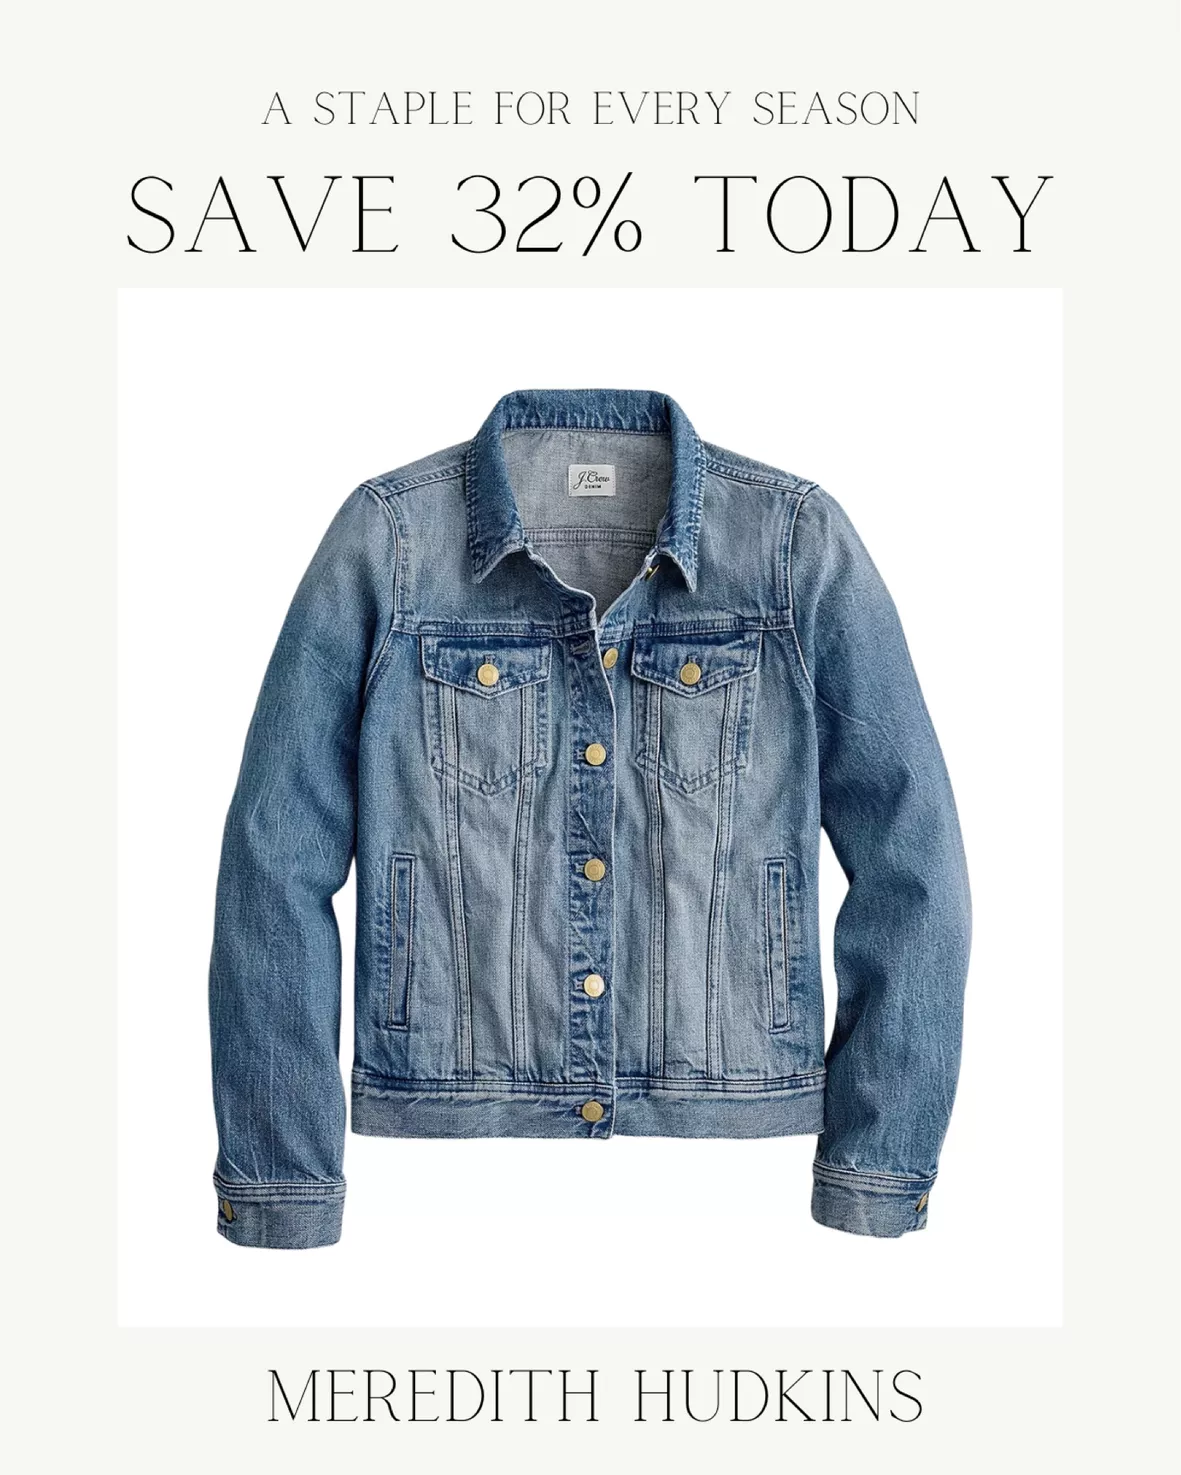 Factory: Classic Jean Jacket For Women